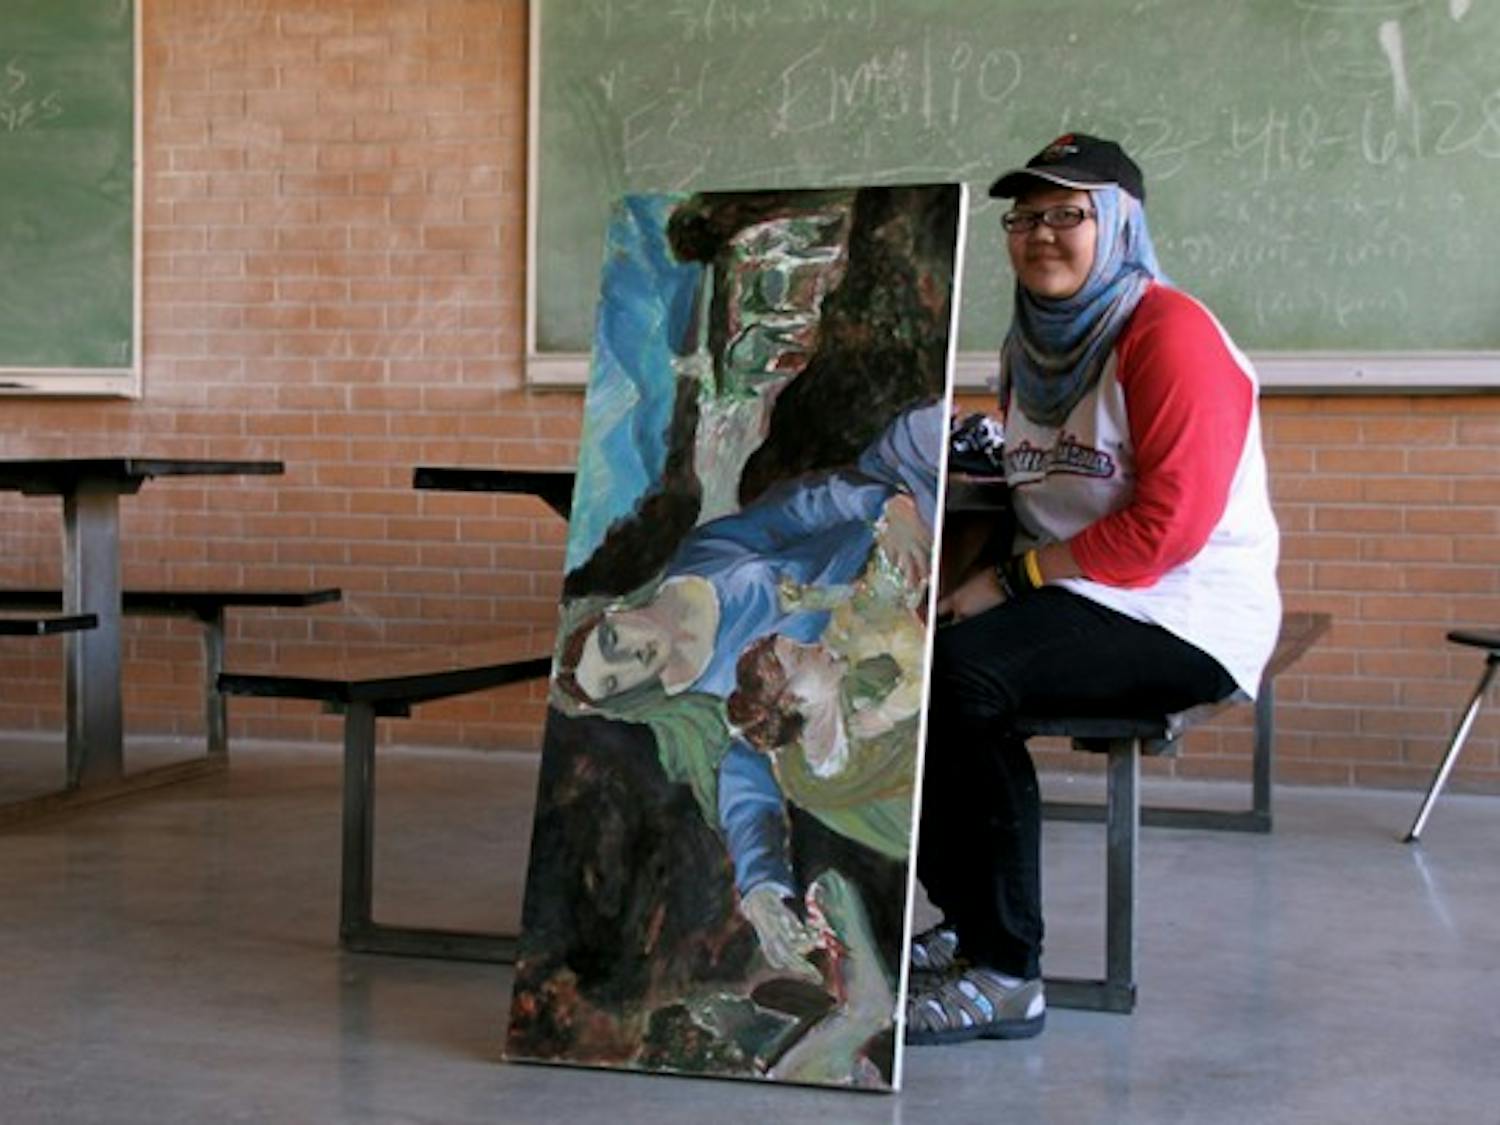 LADY IN PAINTING: Painting senior Kadhima Tung waits between classes with her latest piece of art outside of the Physical Sciences Center Oct. 26. (Photo by Rosie Gochnour)